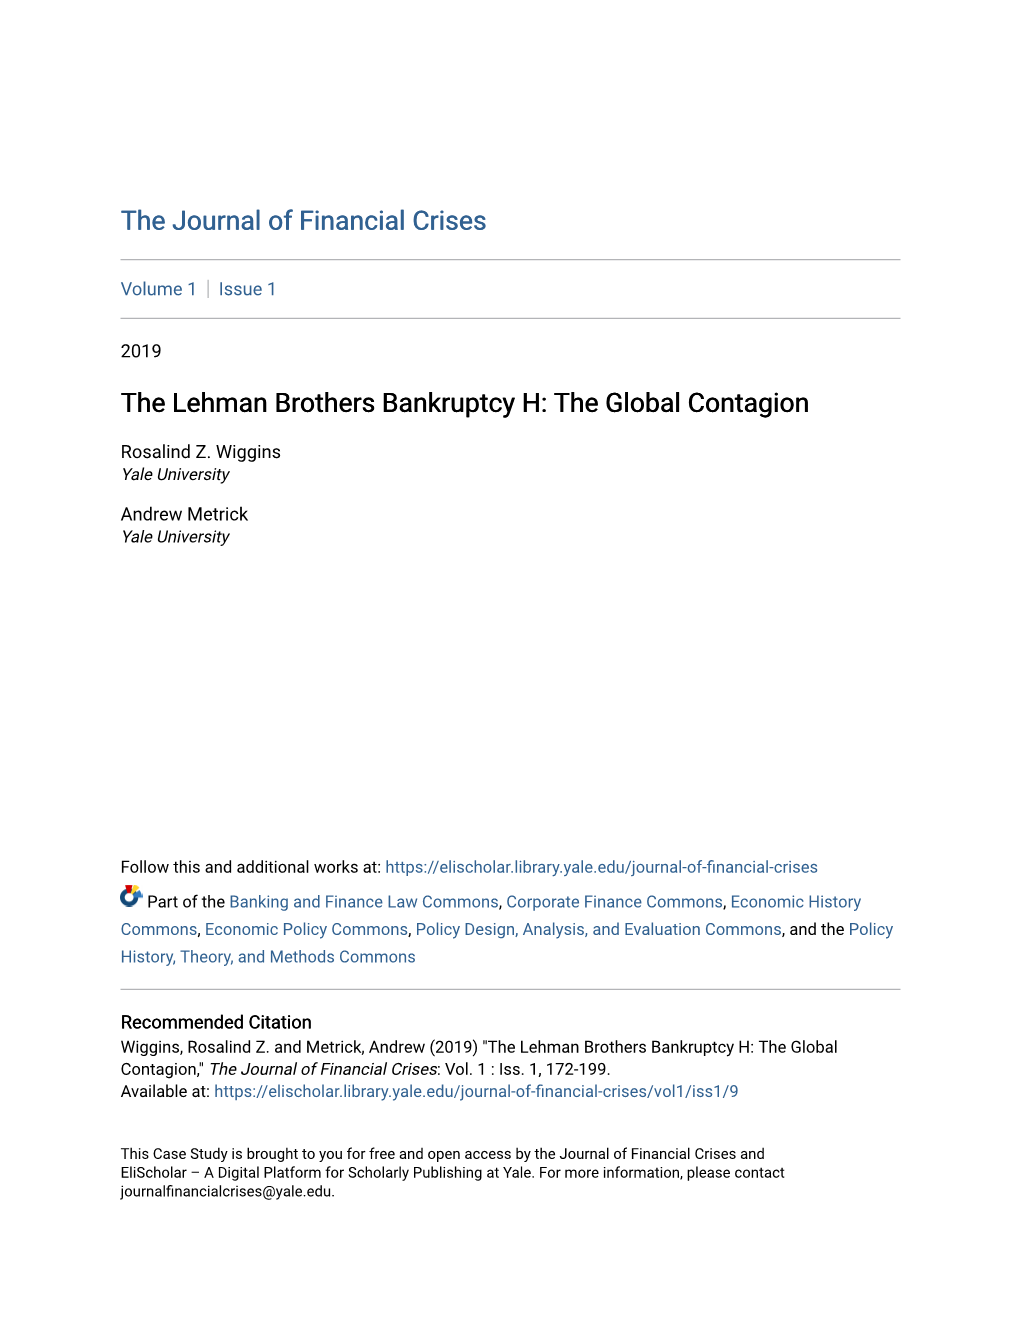 The Lehman Brothers Bankruptcy H: the Global Contagion